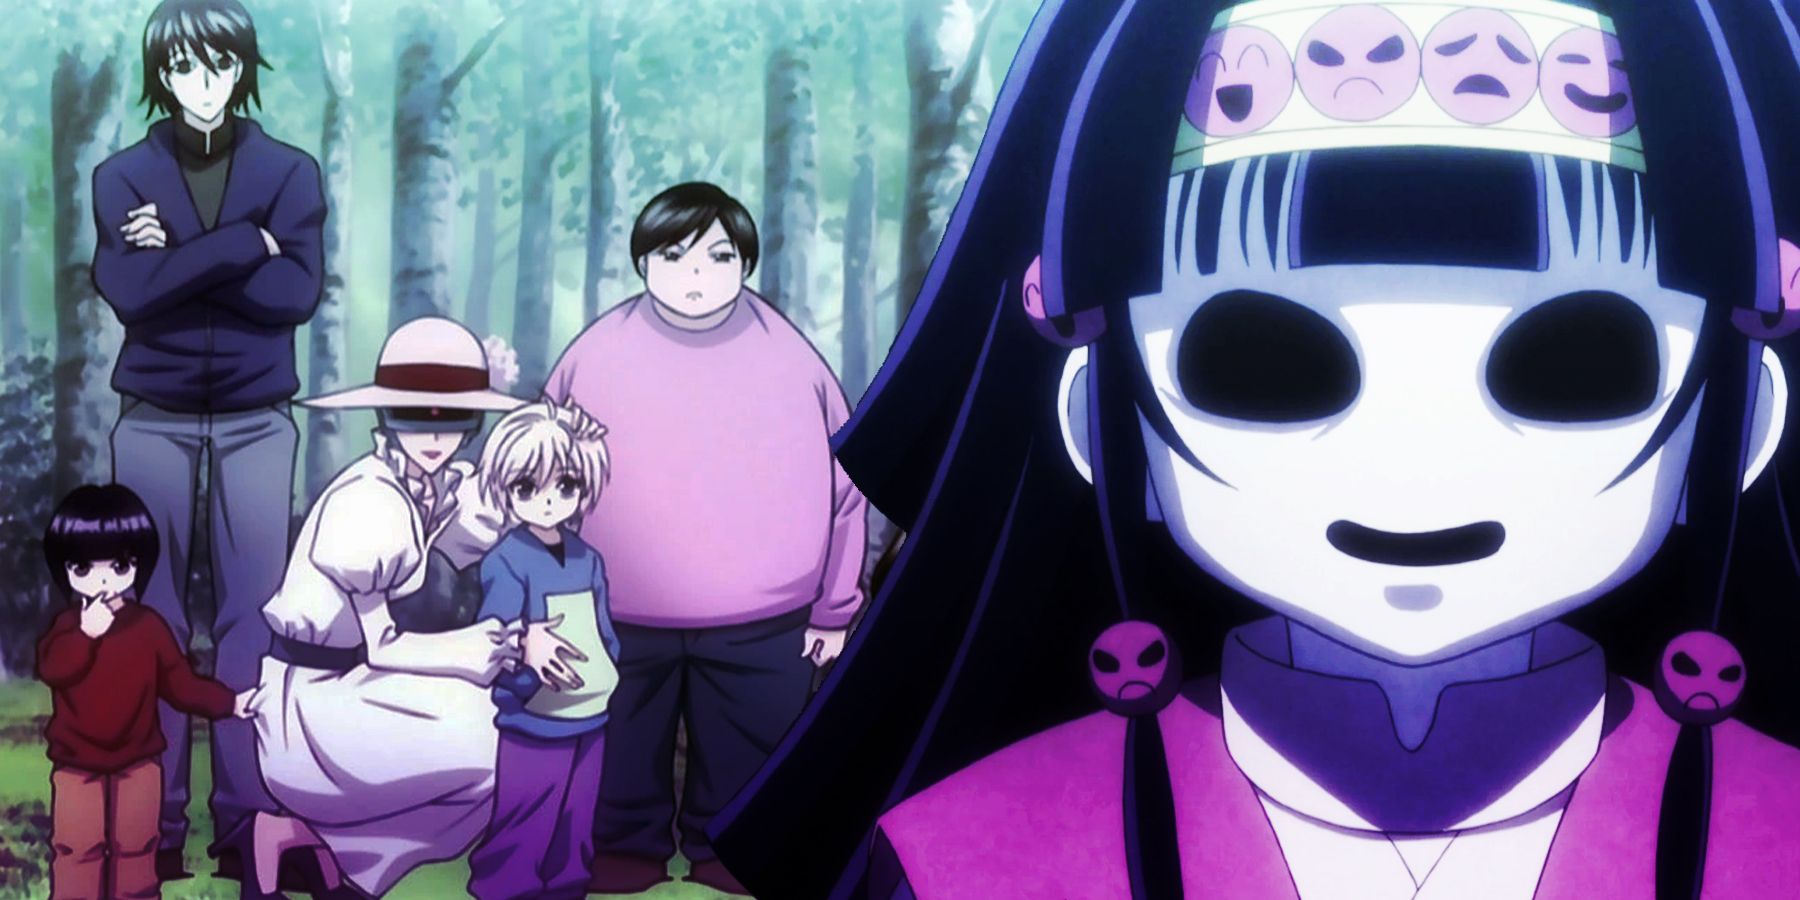 Hunter x Hunter: All Members Of The Zoldyck Family, Ranked By Strength